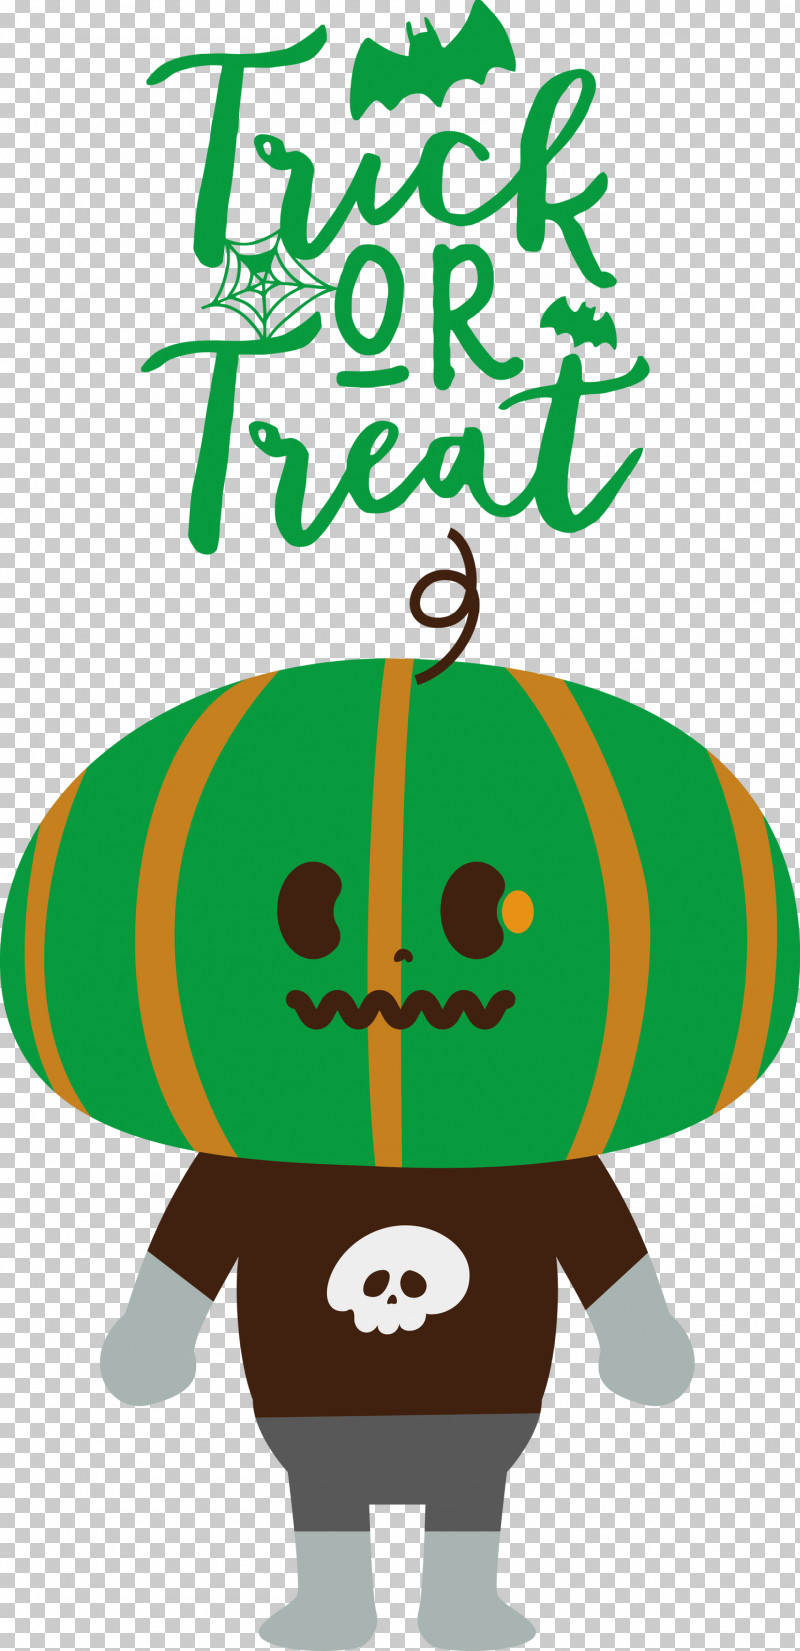 Trick Or Treat Trick-or-treating Halloween PNG, Clipart, Behavior, Cartoon, Green, Halloween, Human Free PNG Download